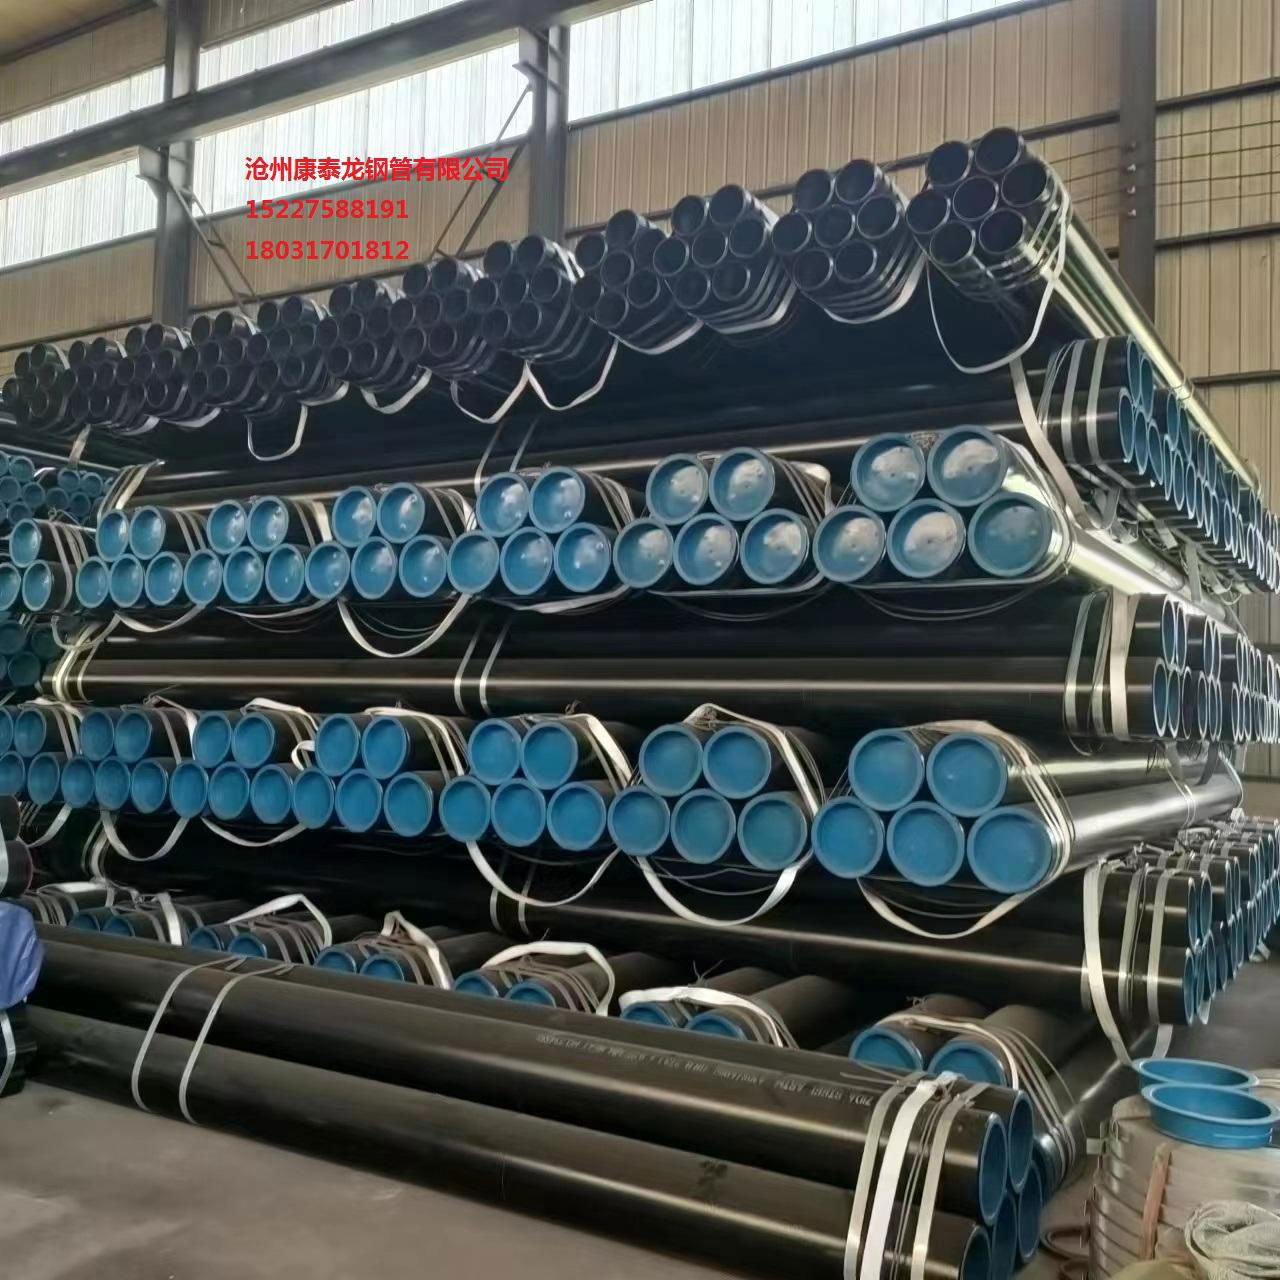 Cangzhou Yulong Steel CoLtd. foreign trade seamless pipe